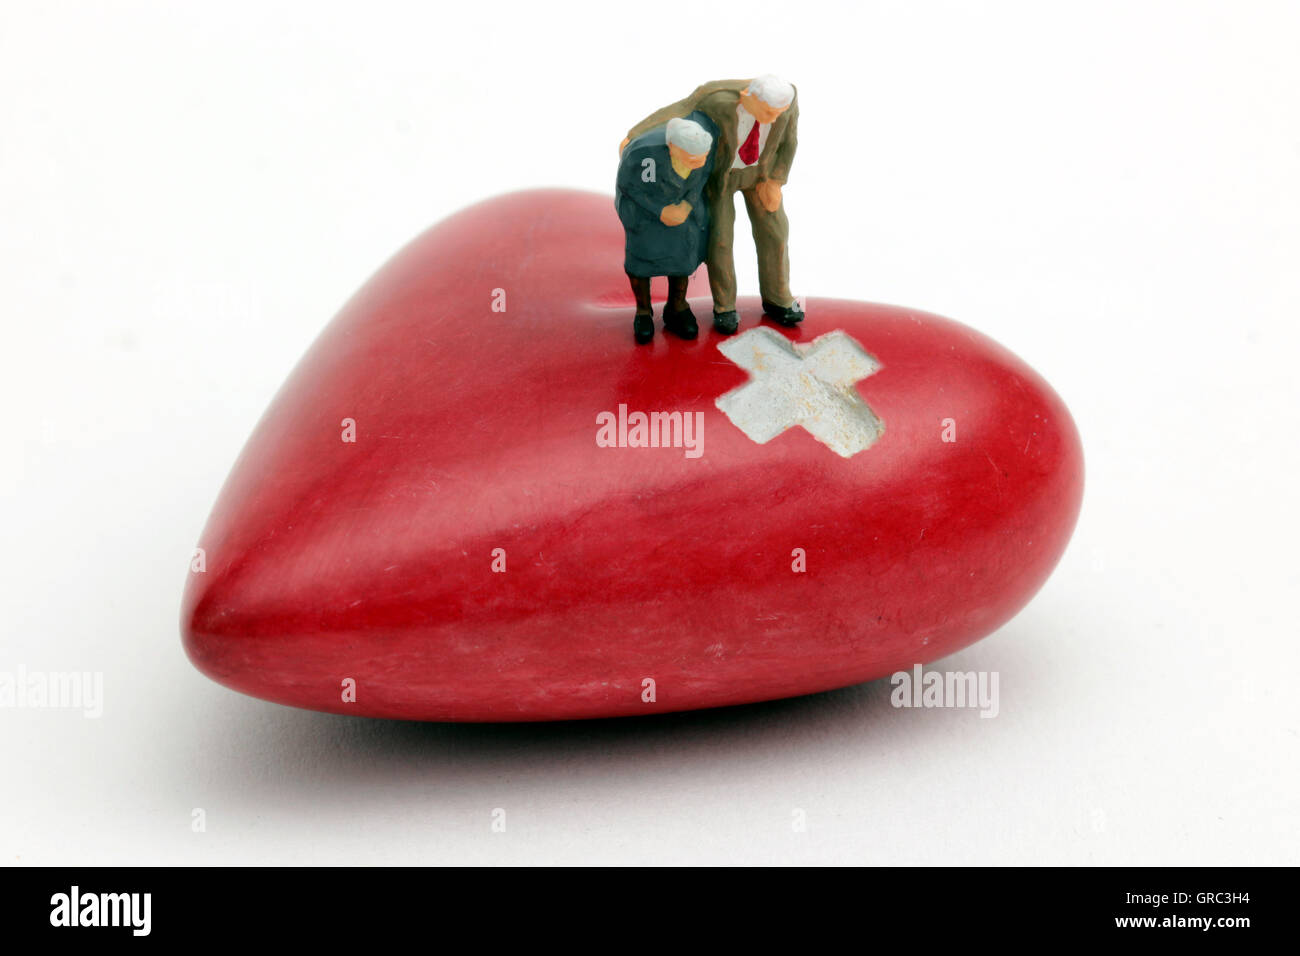 Senior Citizen Standing On A Heart With Swiss Cross Stock Photo